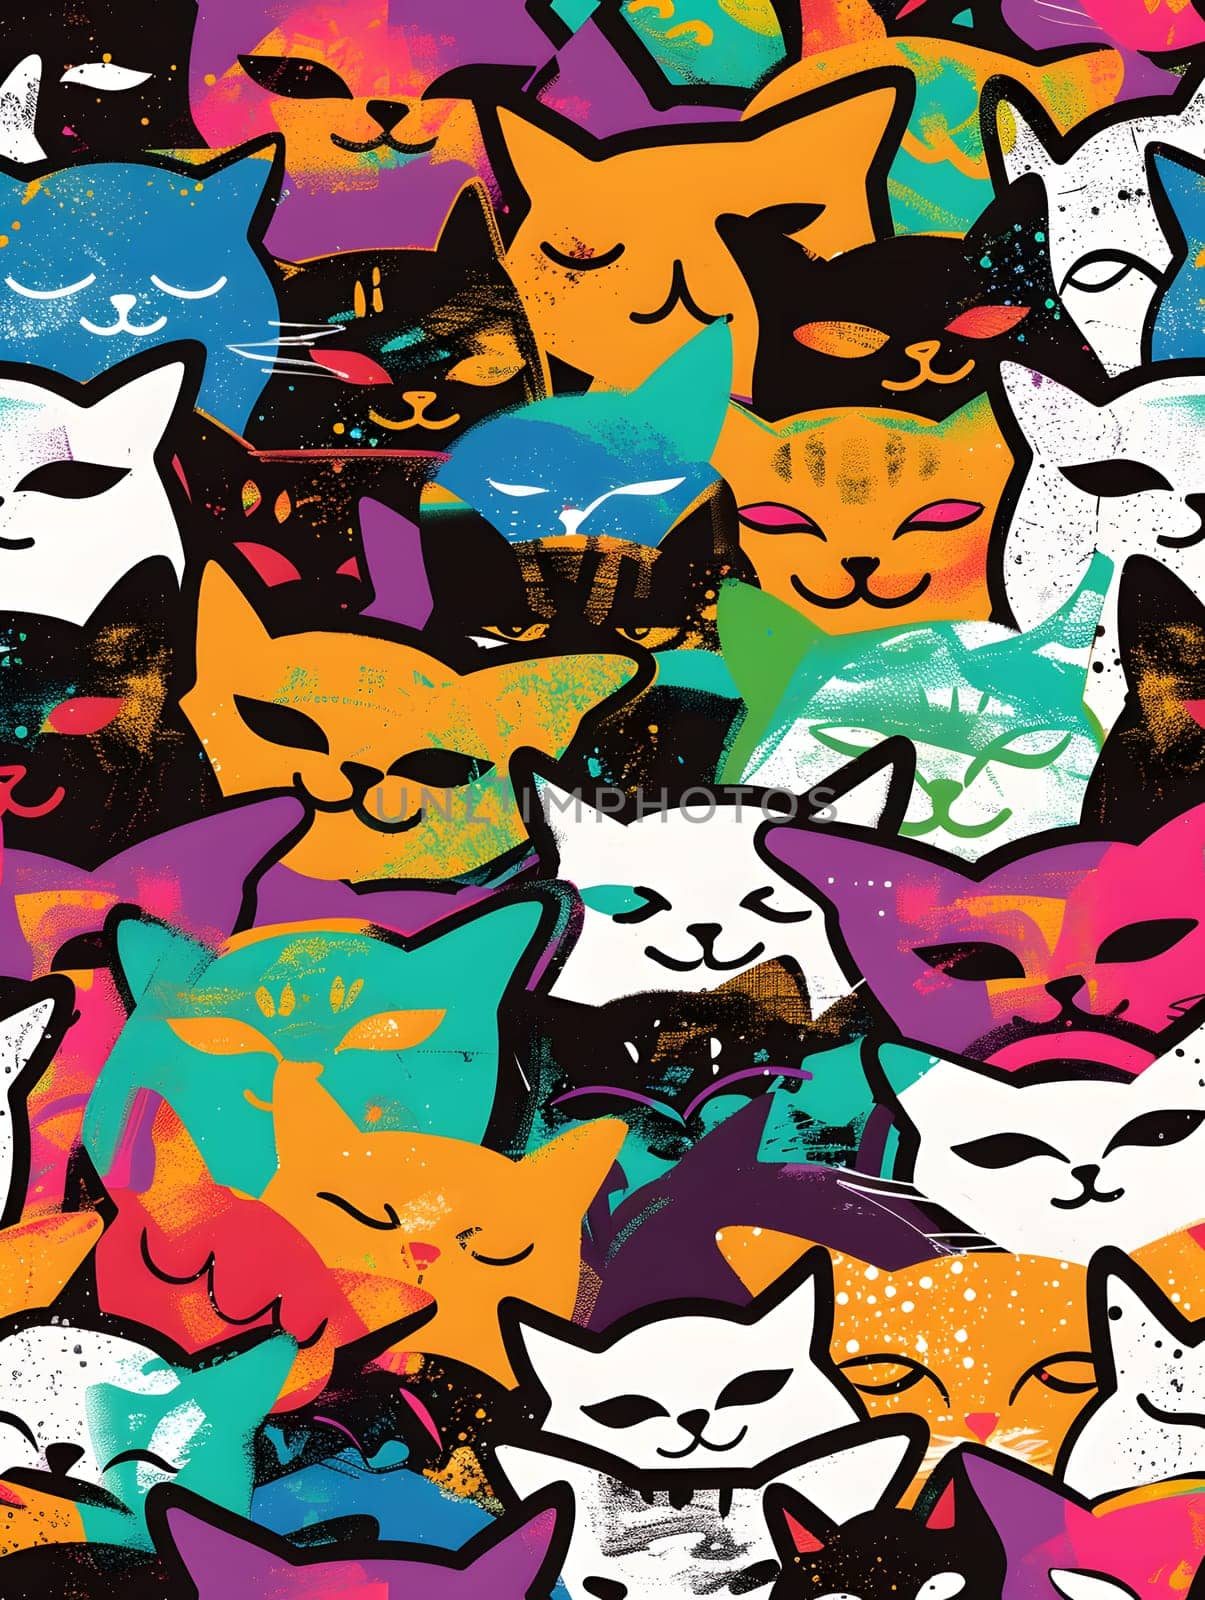 a seamless pattern of colorful cats with their eyes closed by Nadtochiy